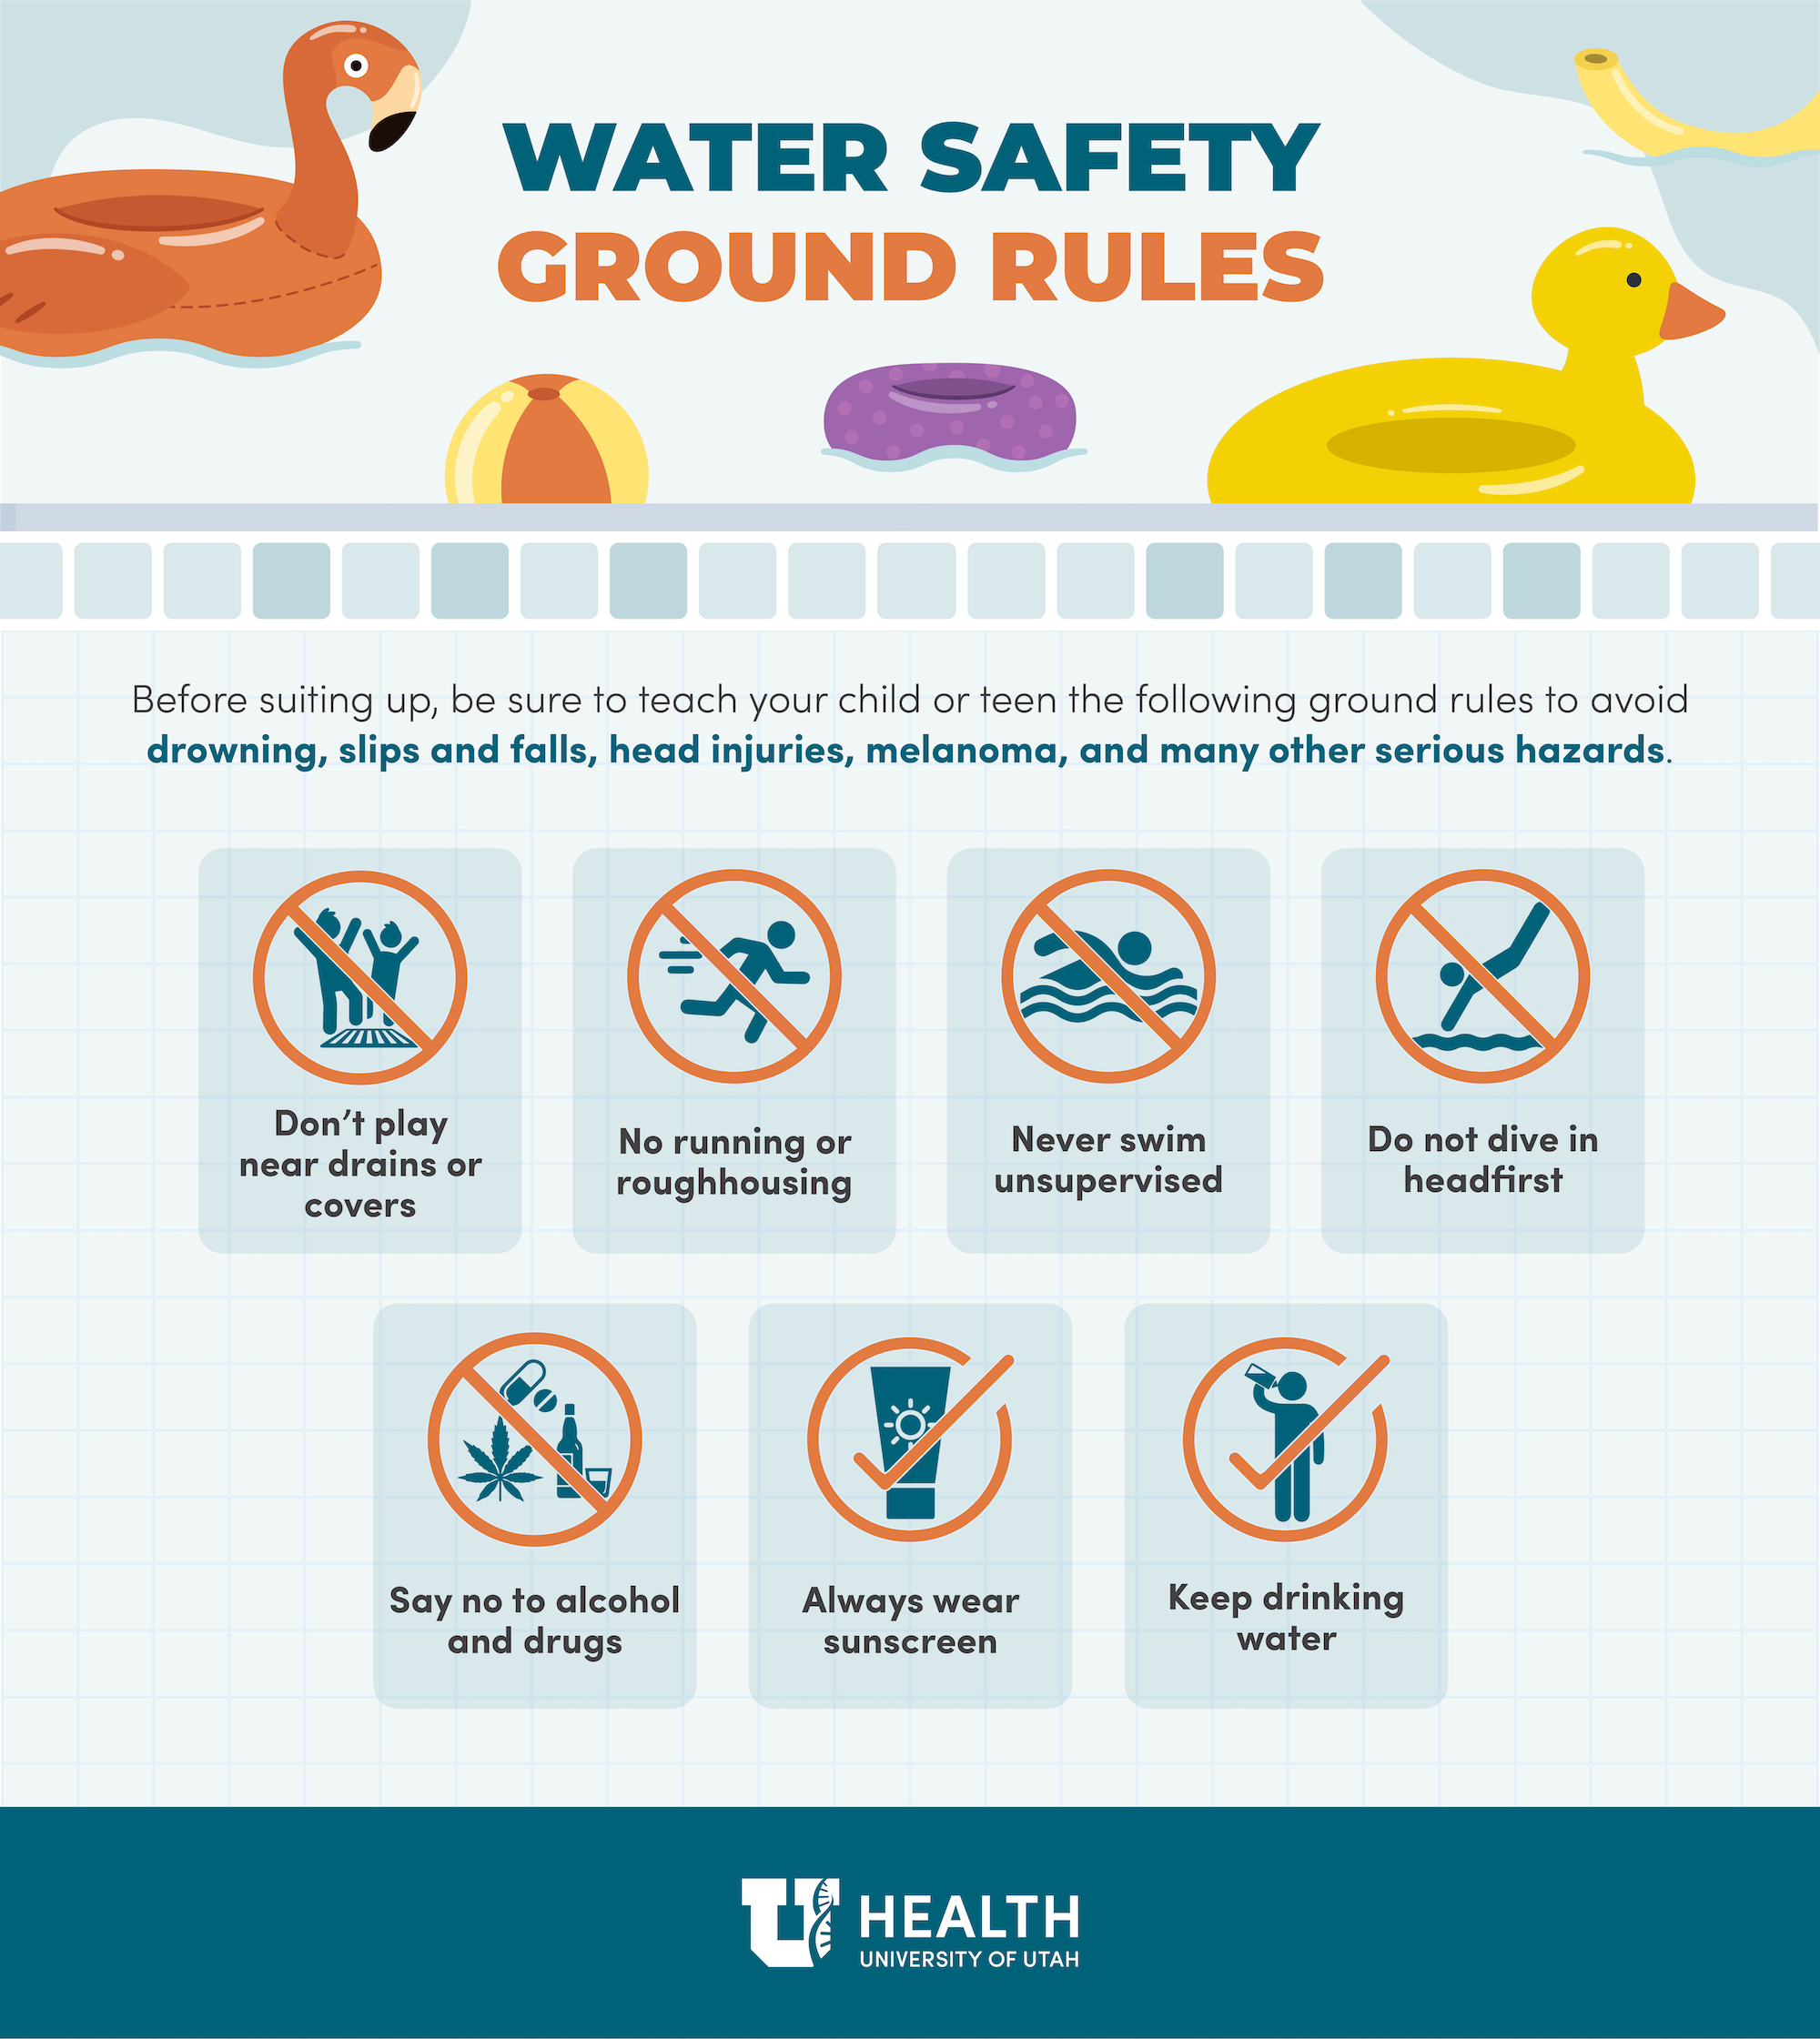 Water safety ground rules